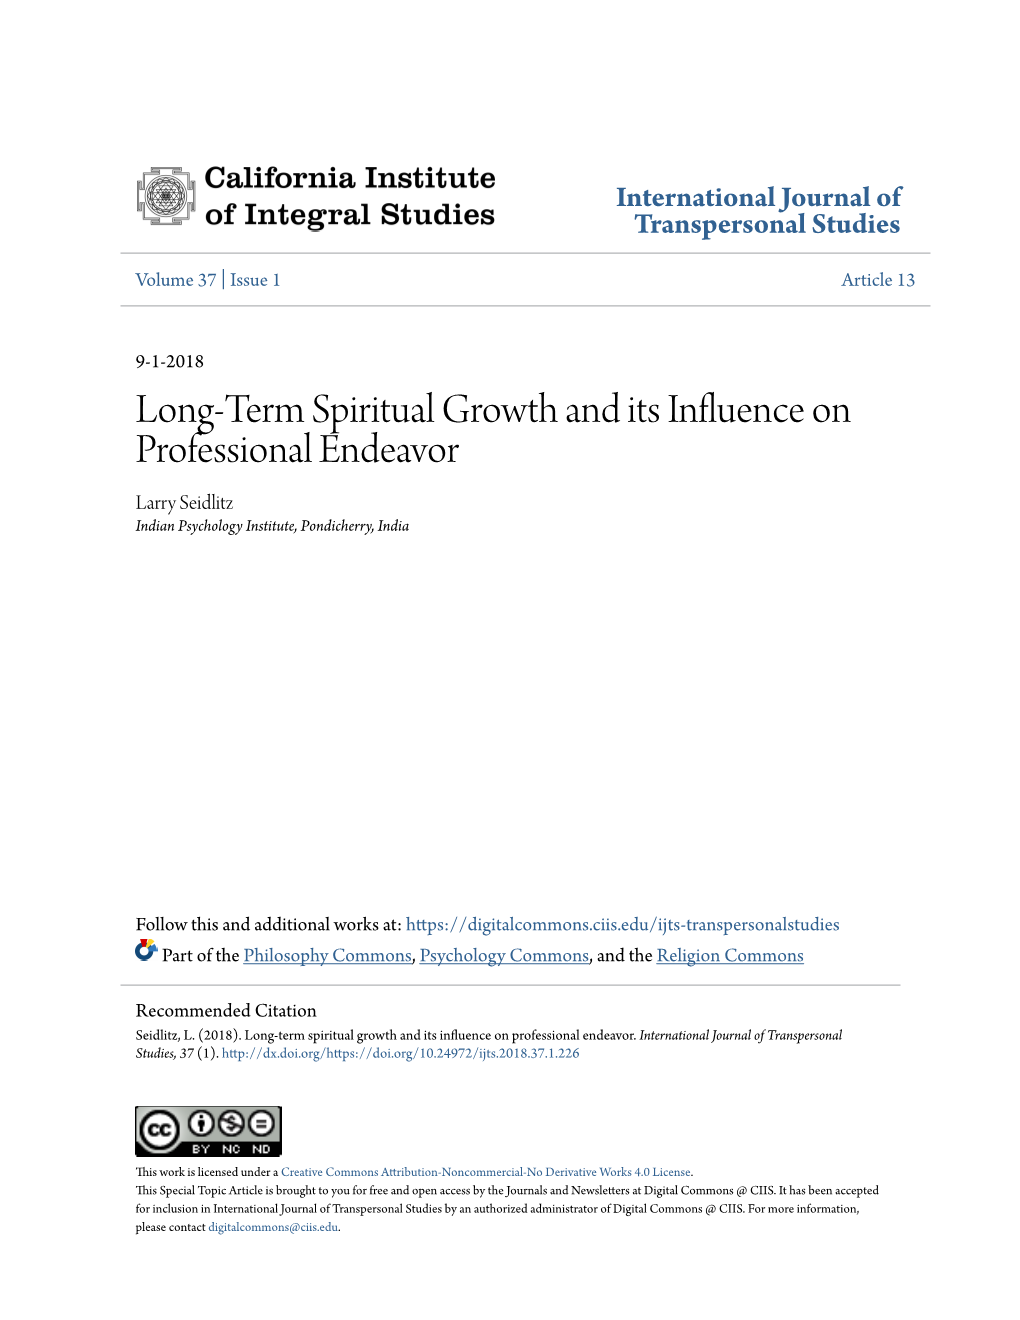 Long-Term Spiritual Growth and Its Influence on Professional Endeavor Larry Seidlitz Indian Psychology Institute, Pondicherry, India